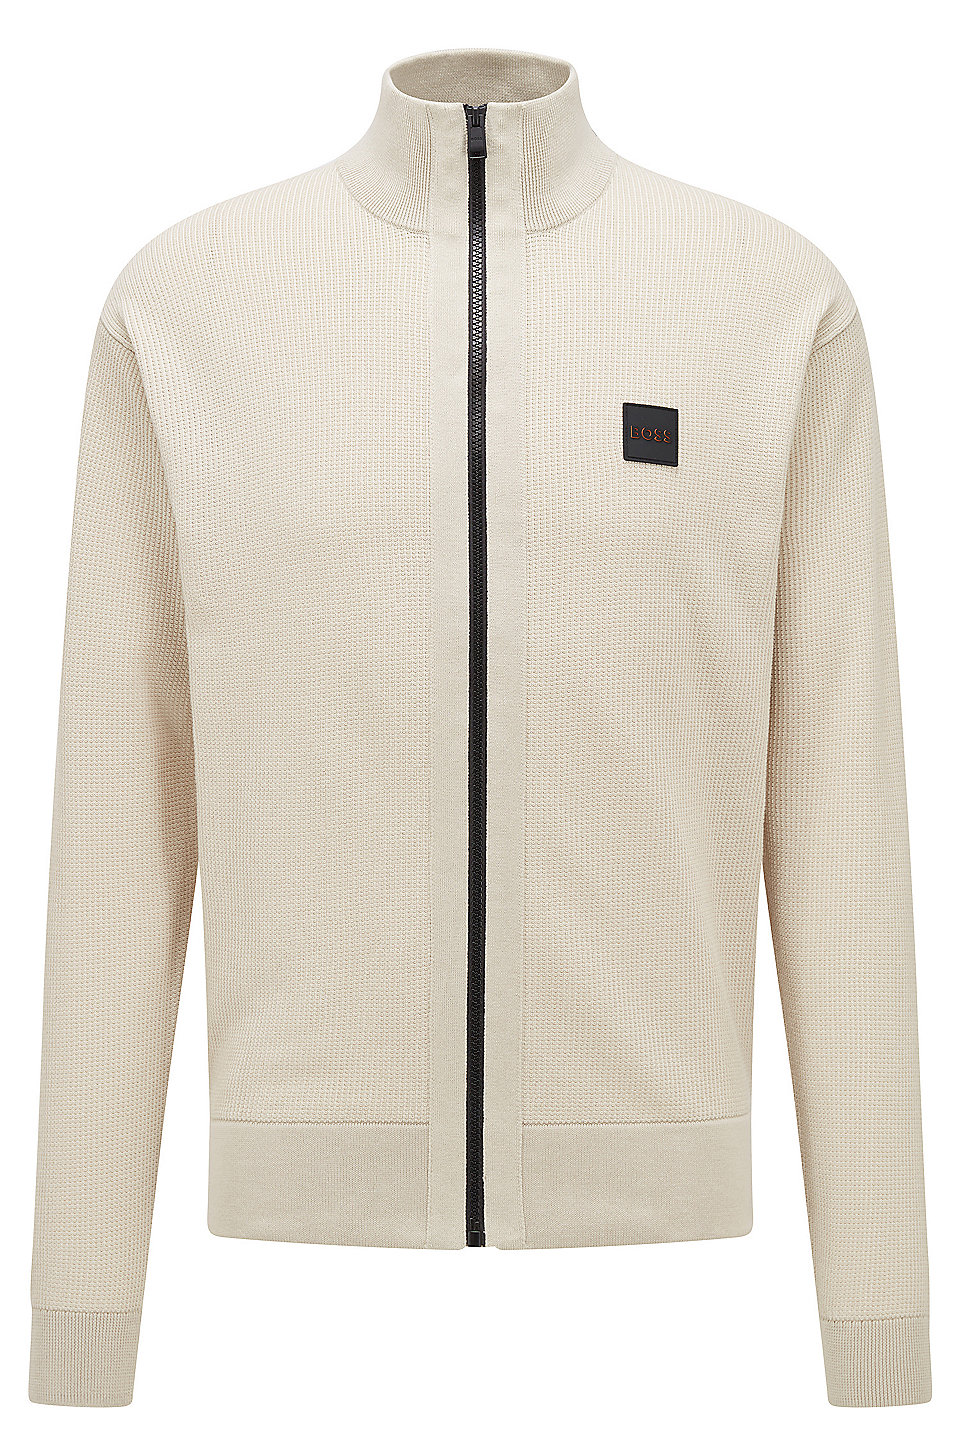 BOSS - Relaxed-fit zip-up jacket in structured cotton